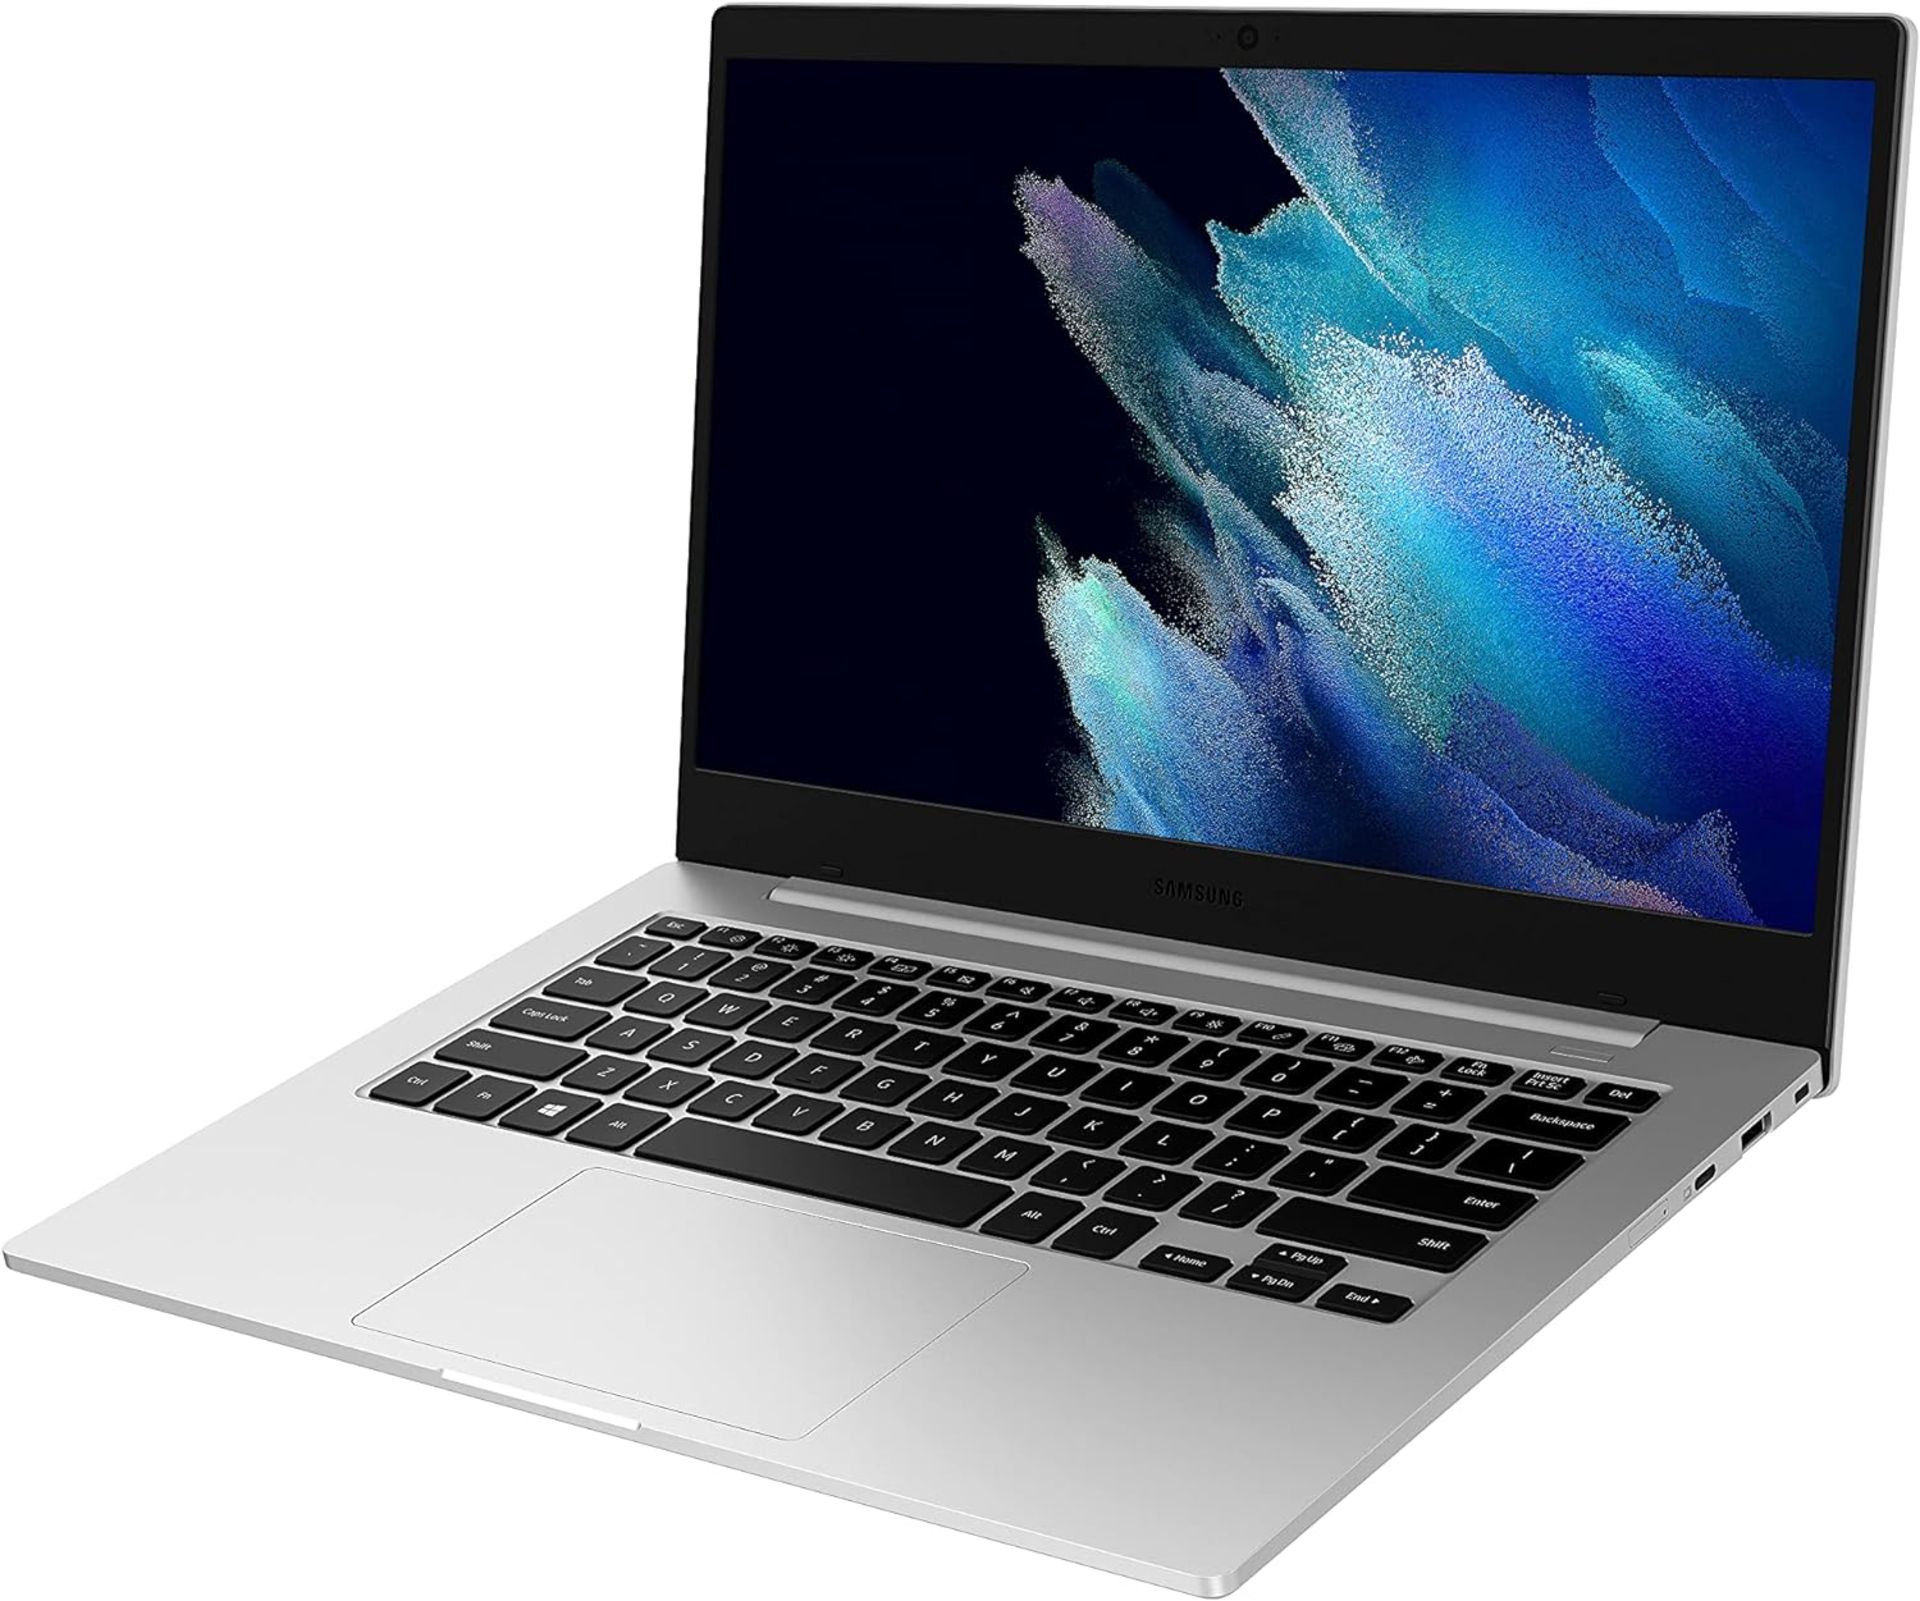 BRAND NEW FACTORY SEALED SAMSUNG Galaxy Book Go 345XLA-KB1 14 Inch Laptop. RRP £399. (CGE). - Image 5 of 7